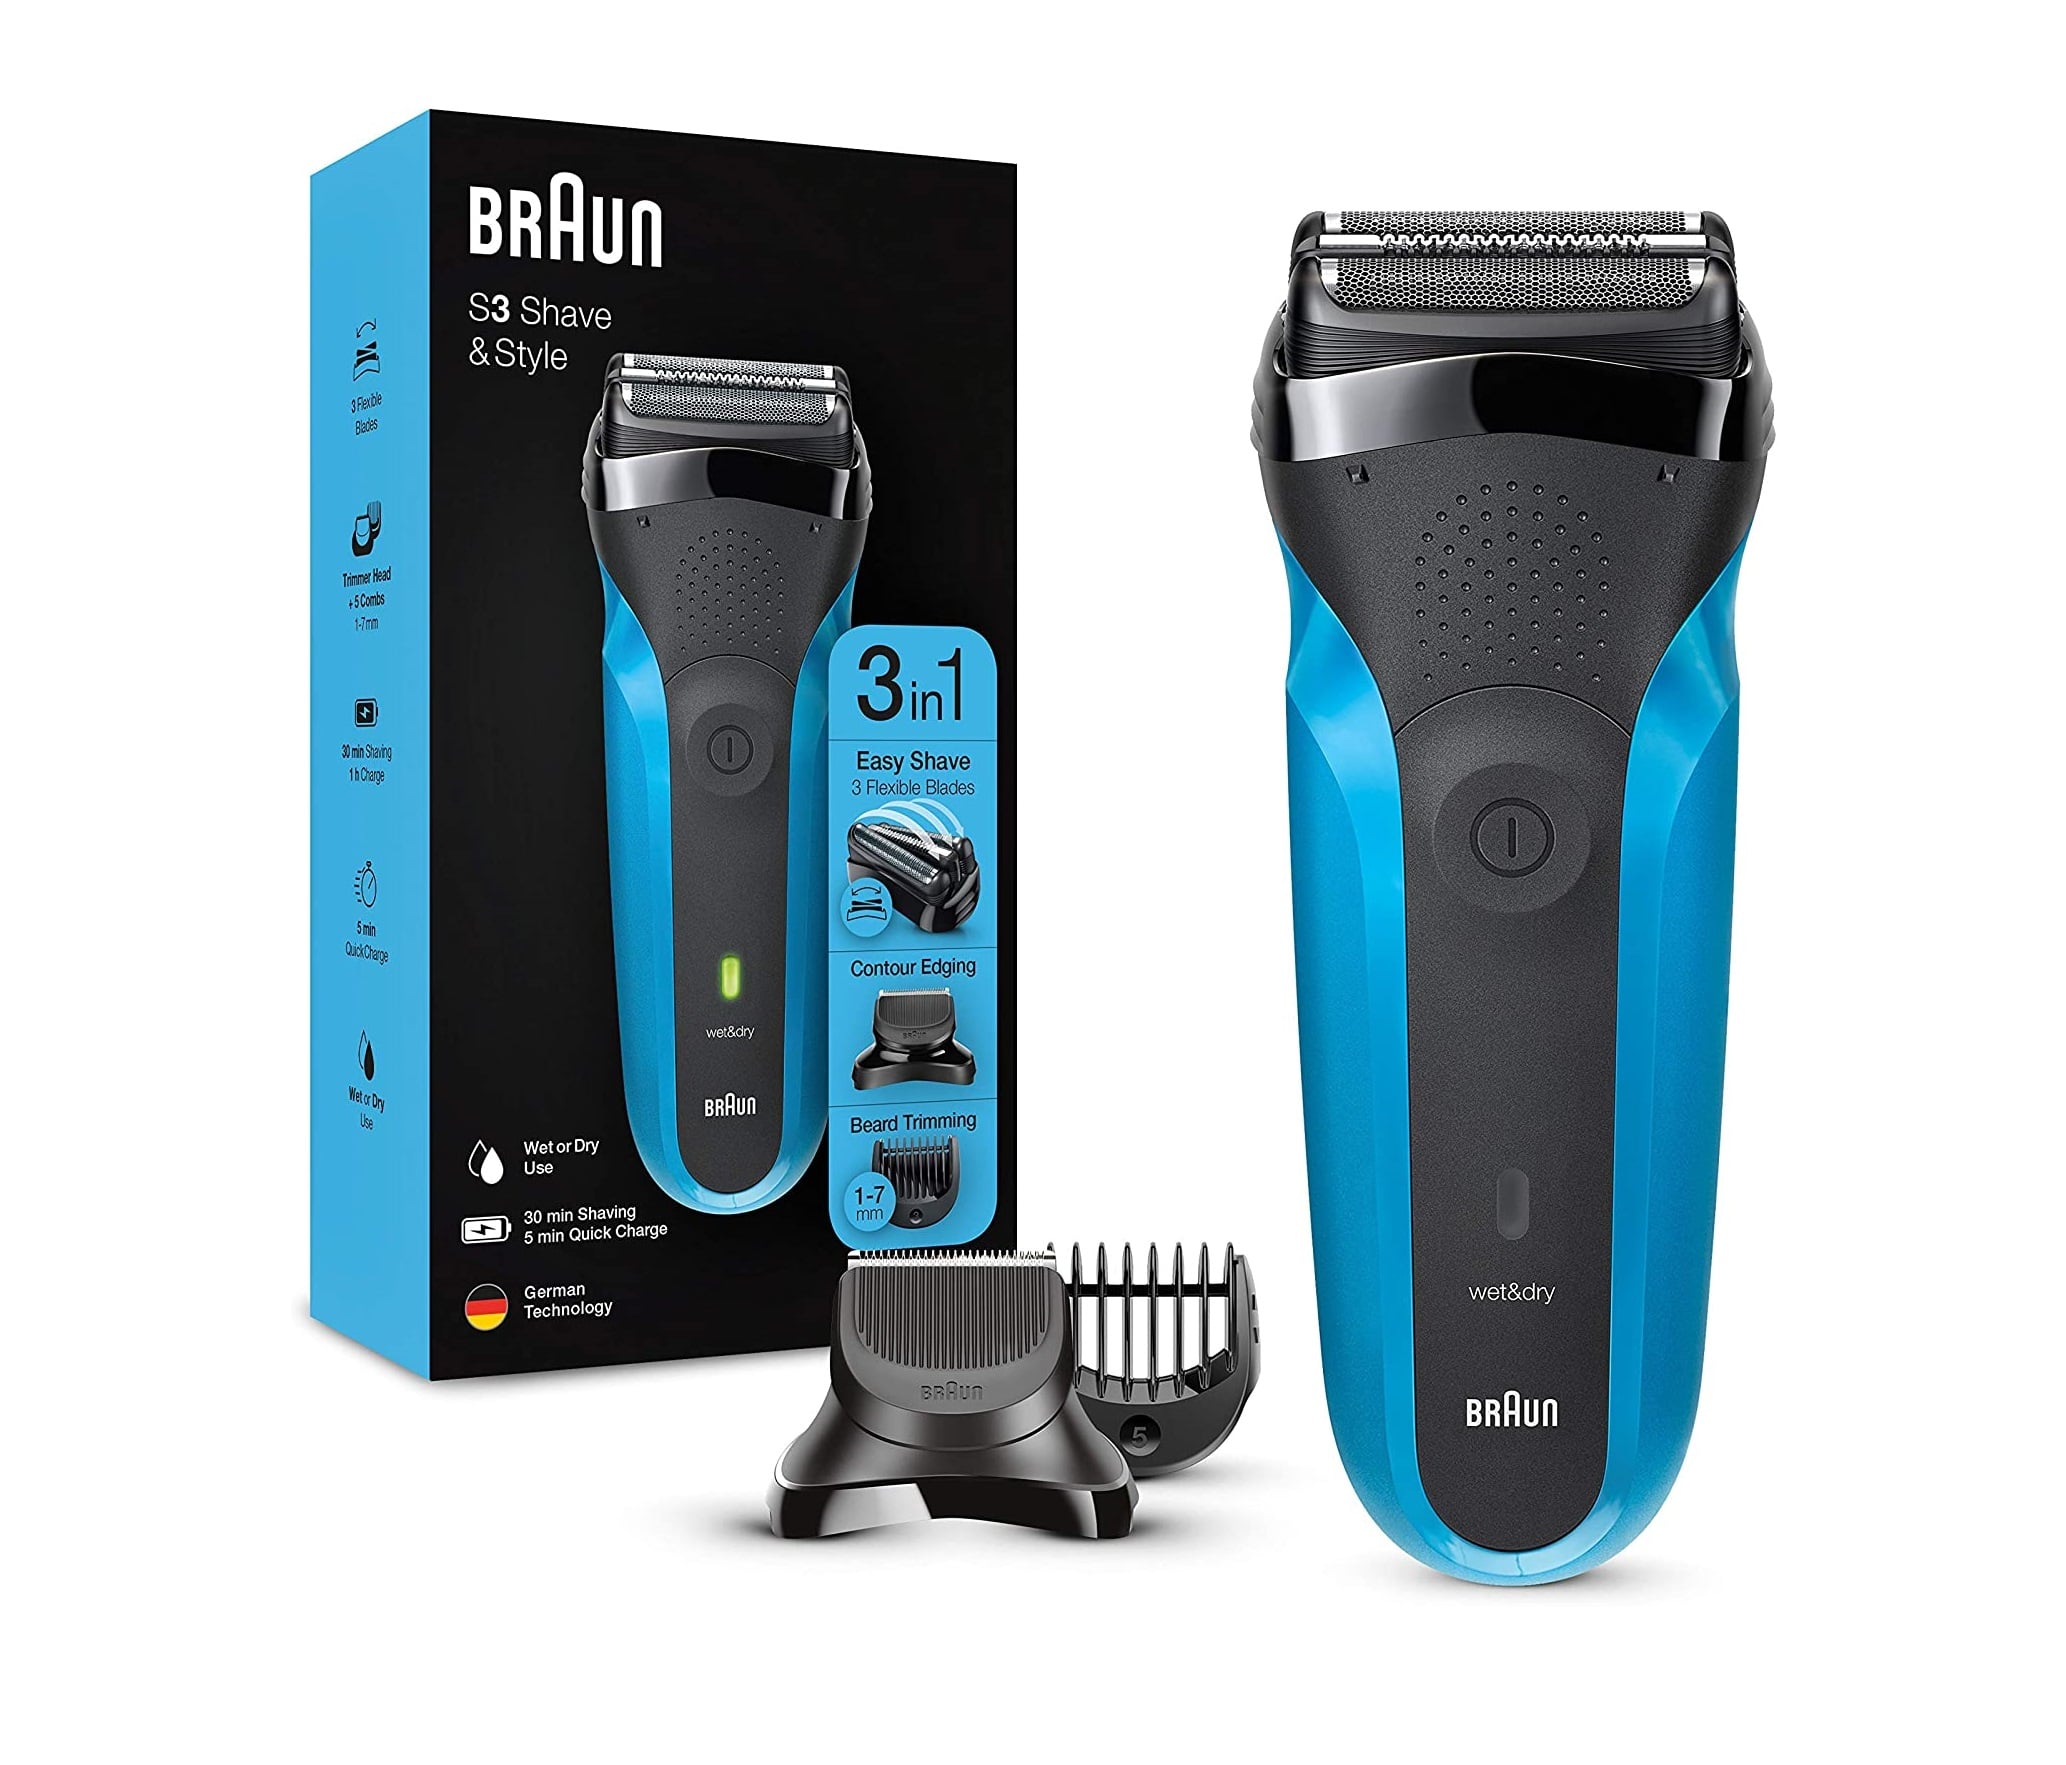 Meilleure tondeuse barbe 2022 - Braun Series 3 Shave & Style 310BT